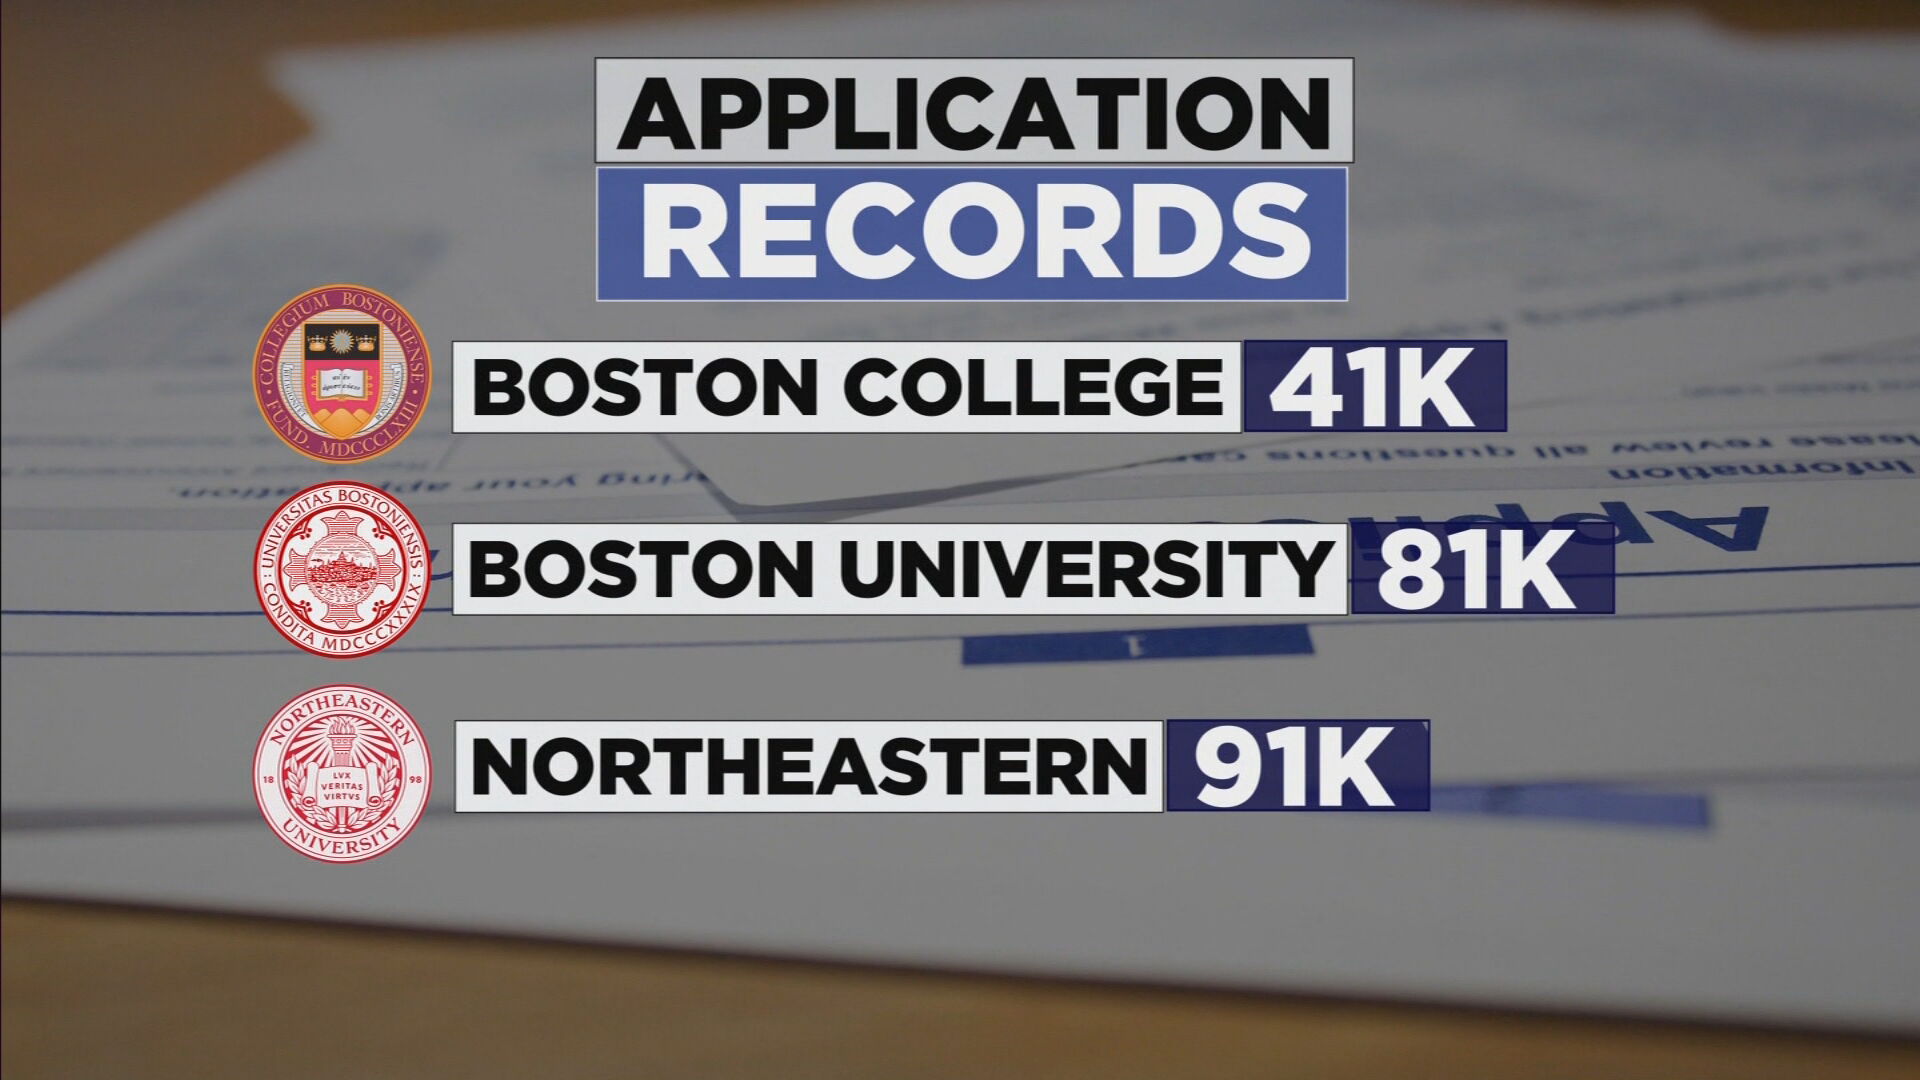 BC, BU, And Northeastern Receiving Record Number Of College